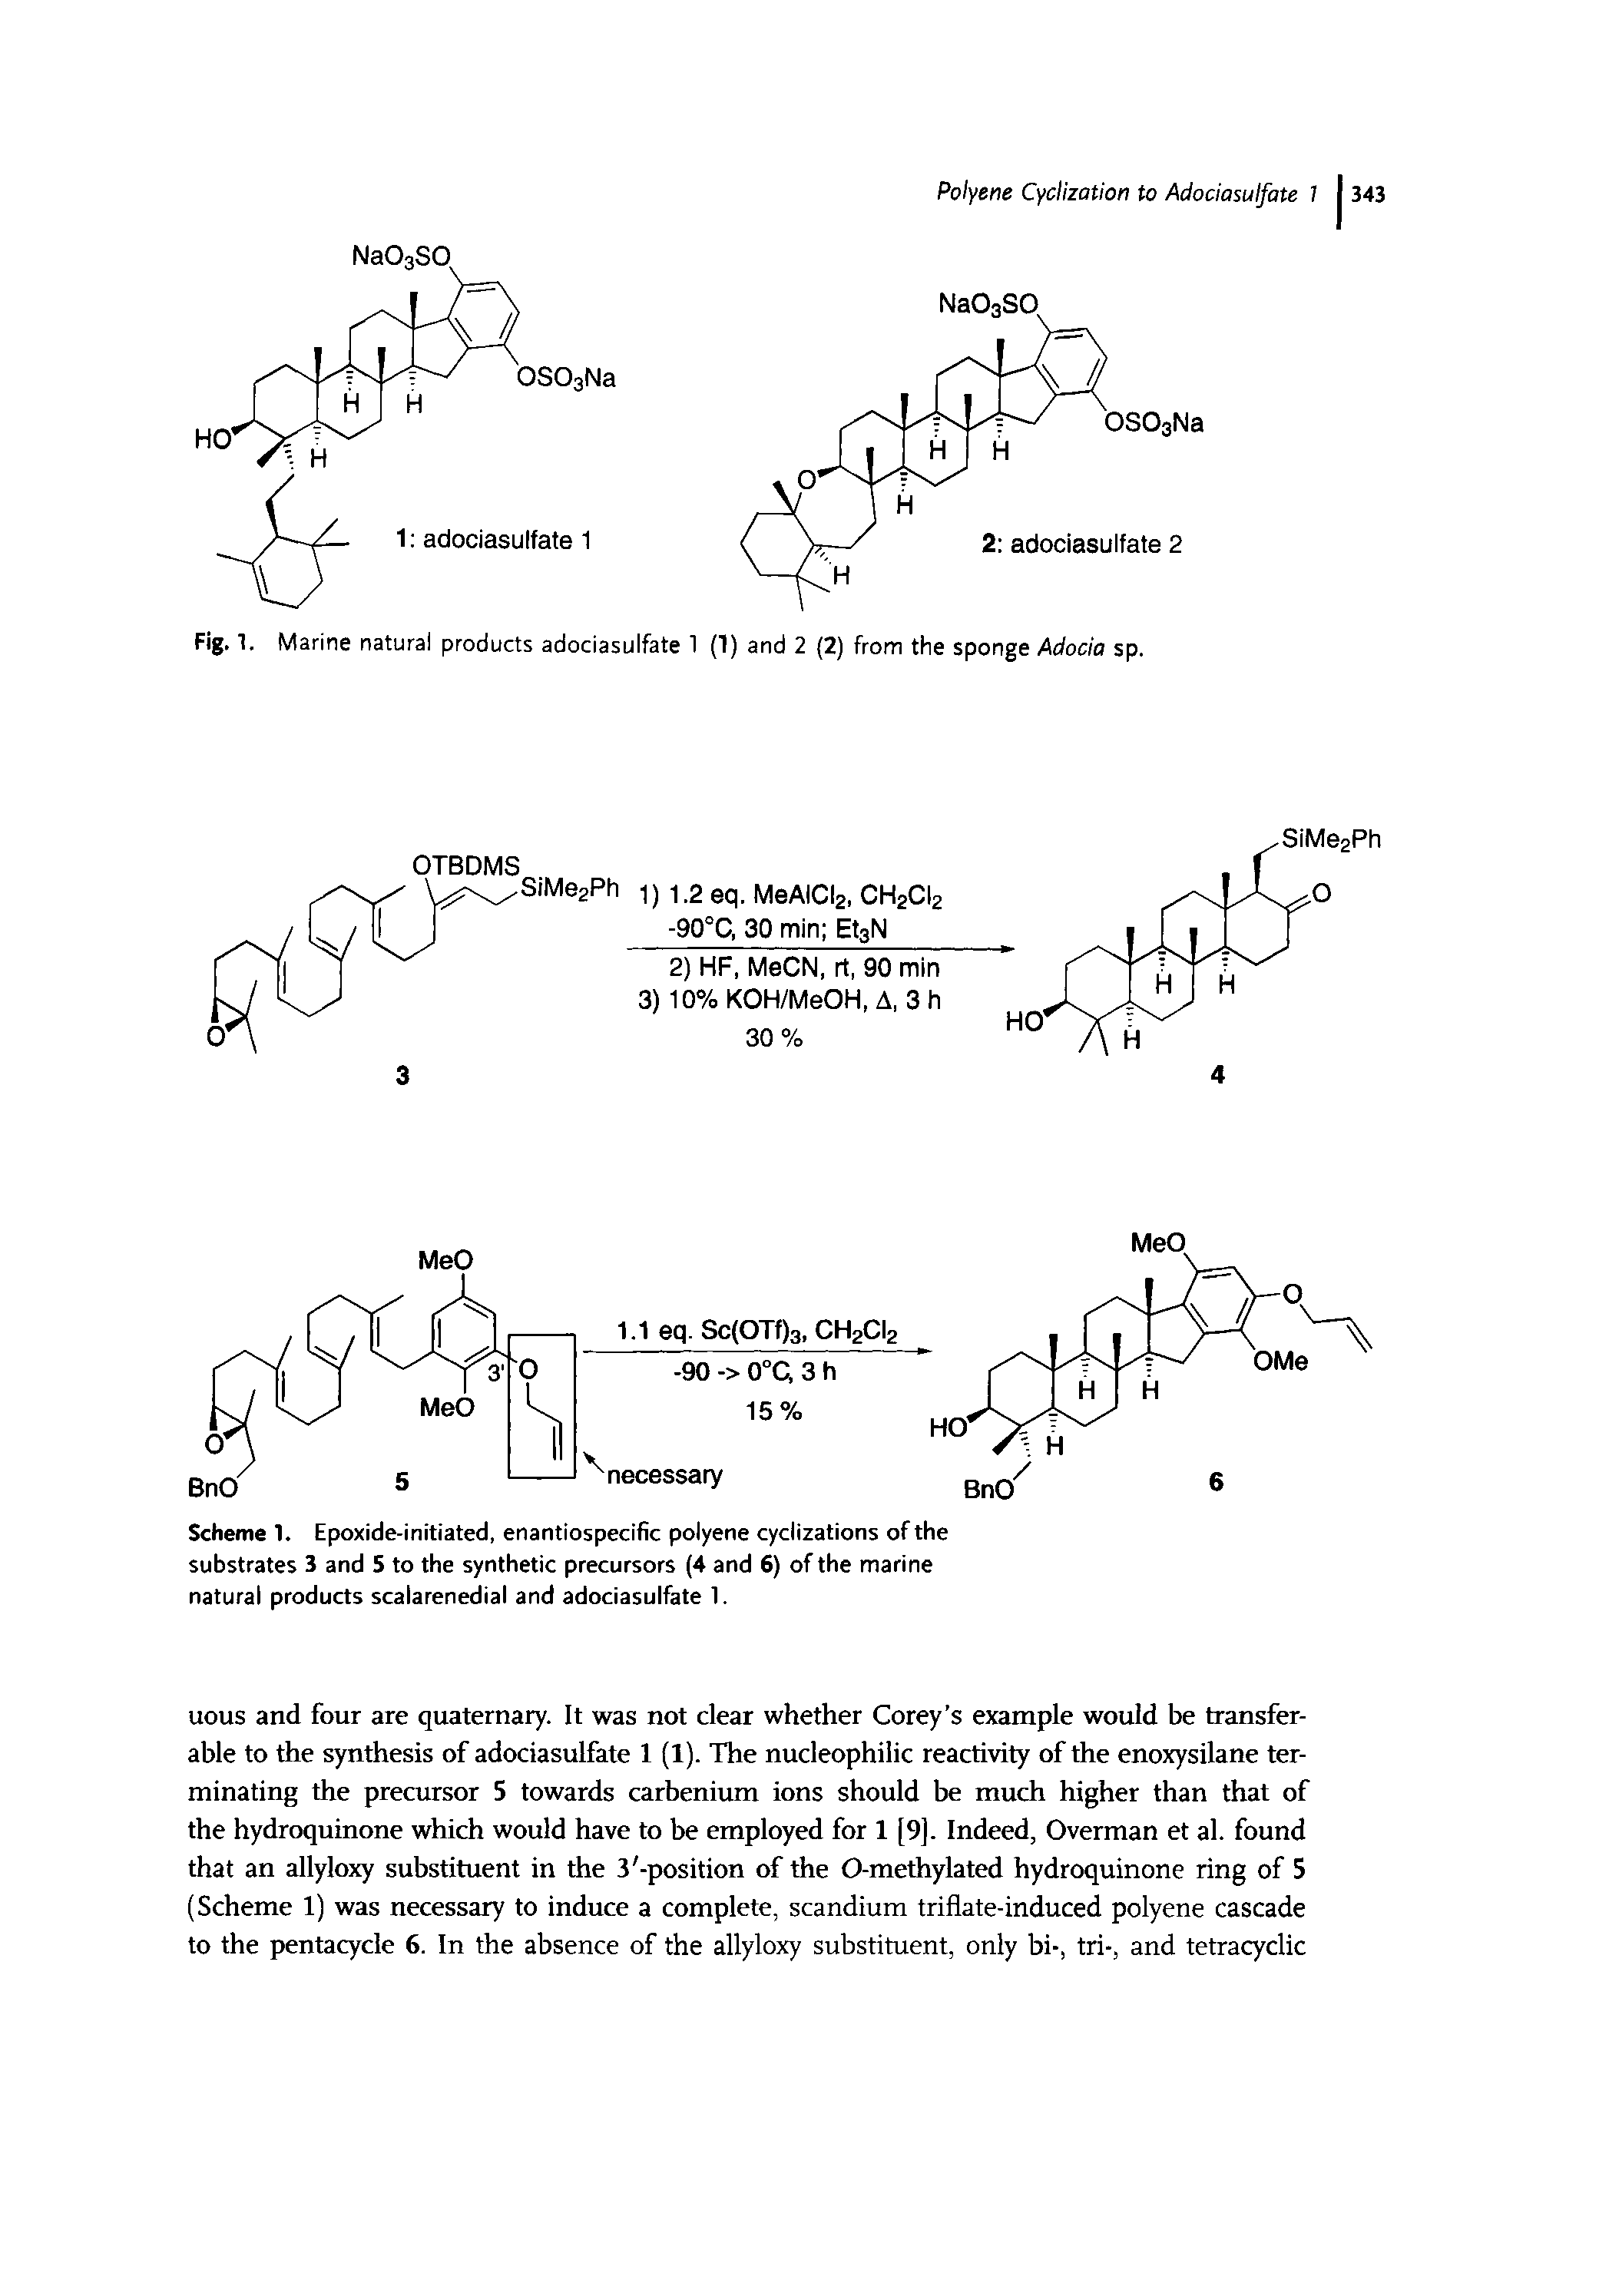 Scheme 1. Epoxide-initiated, enantiospecific polyene cyclizations of the substrates 3 and 5 to the synthetic precursors (4 and 6) of the marine natural products scaiarenedial and adociasulfate 1.